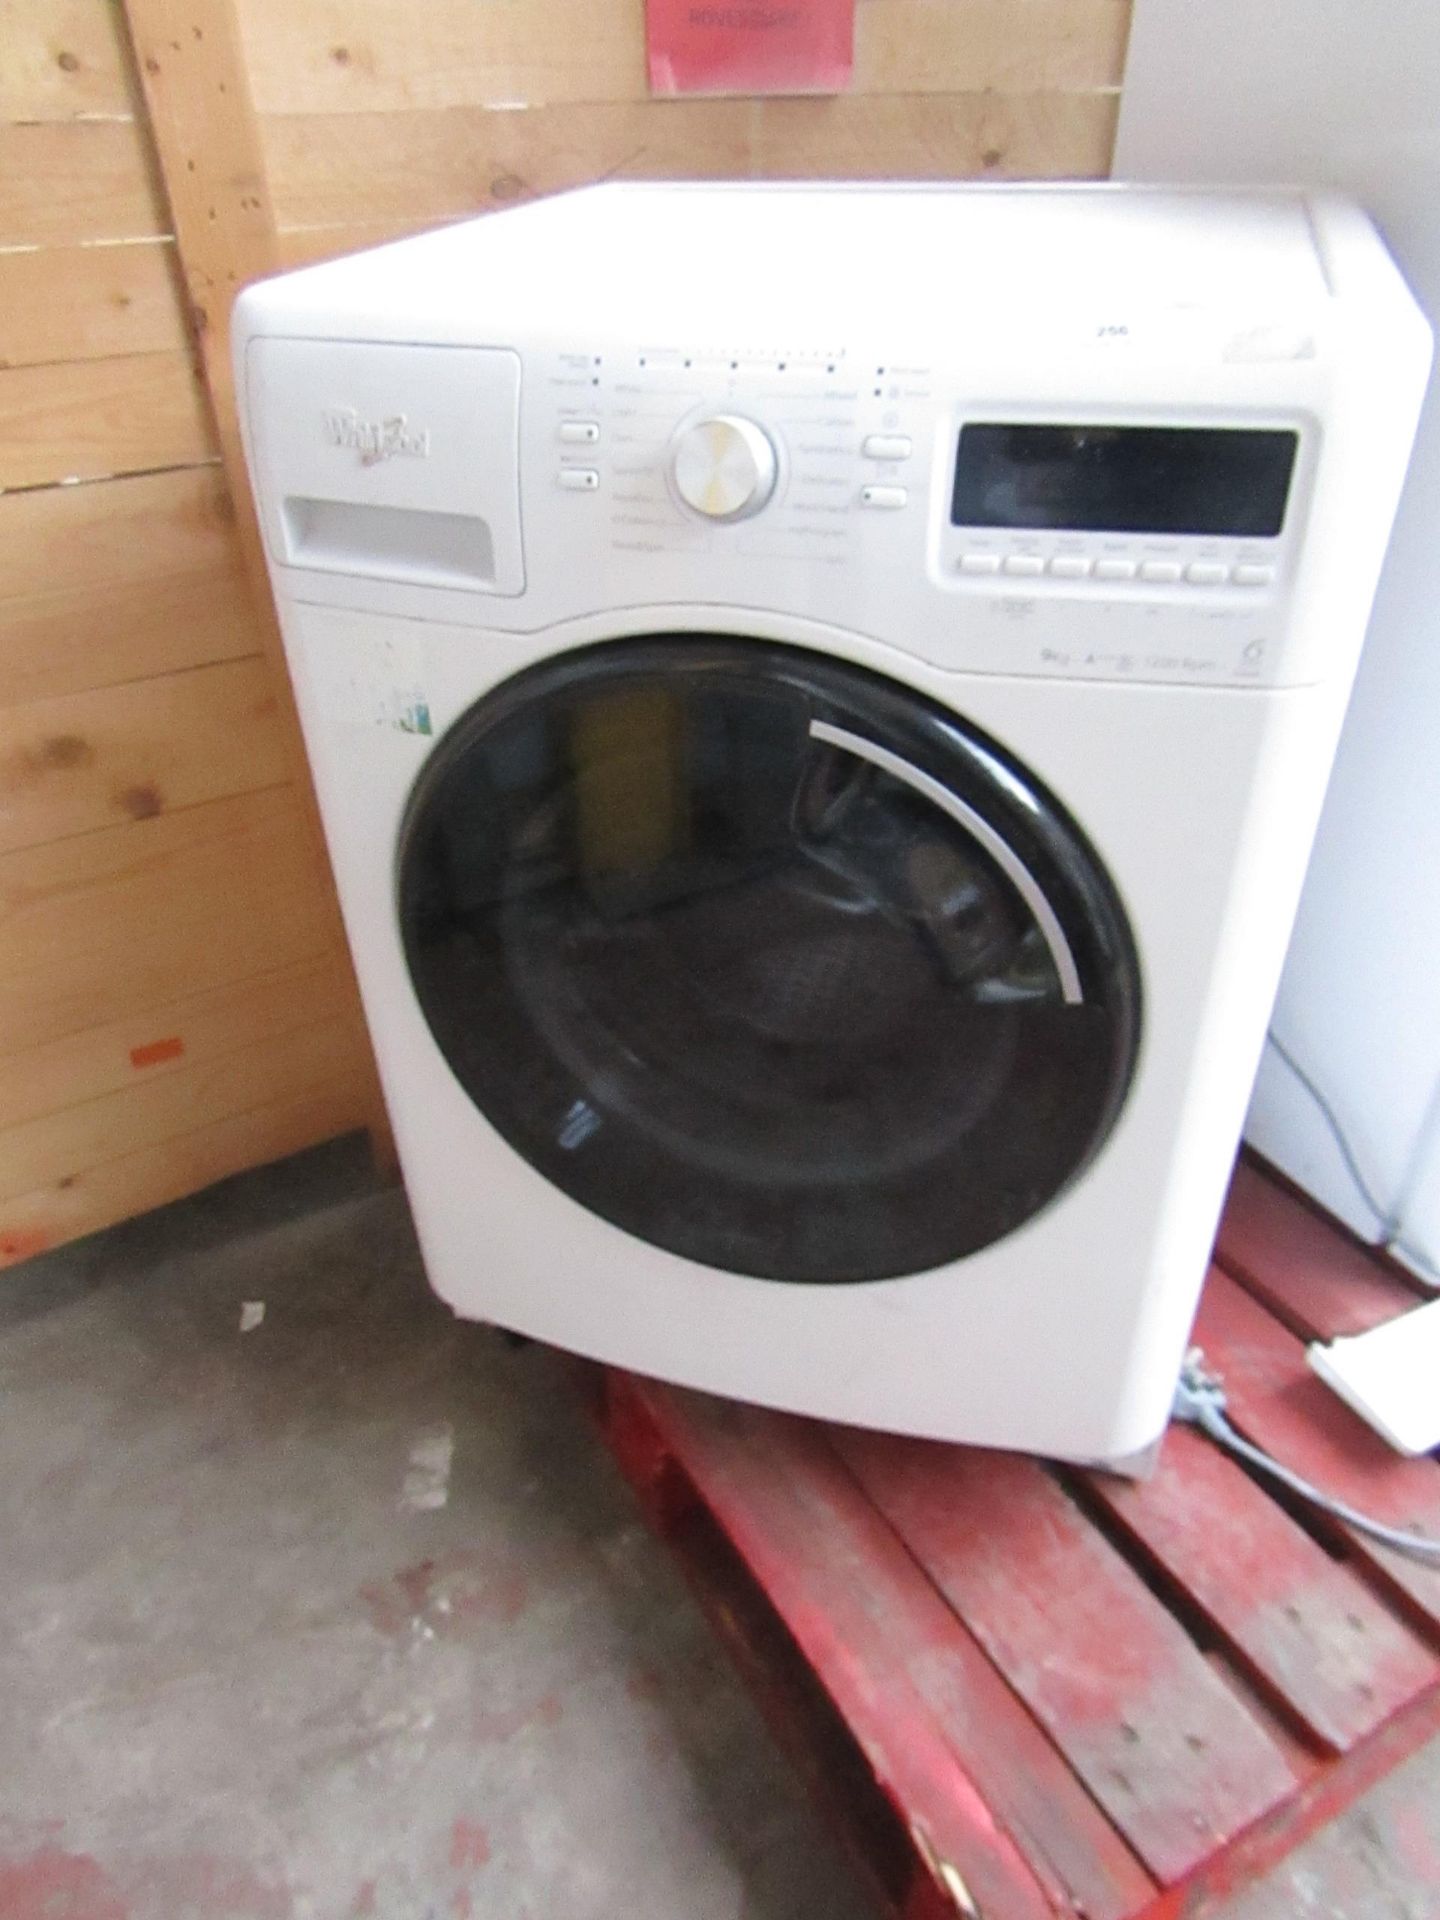 Whirlpool 6th Sense Colours 9Kg washing machine, powers on but no spin. Not tested any other